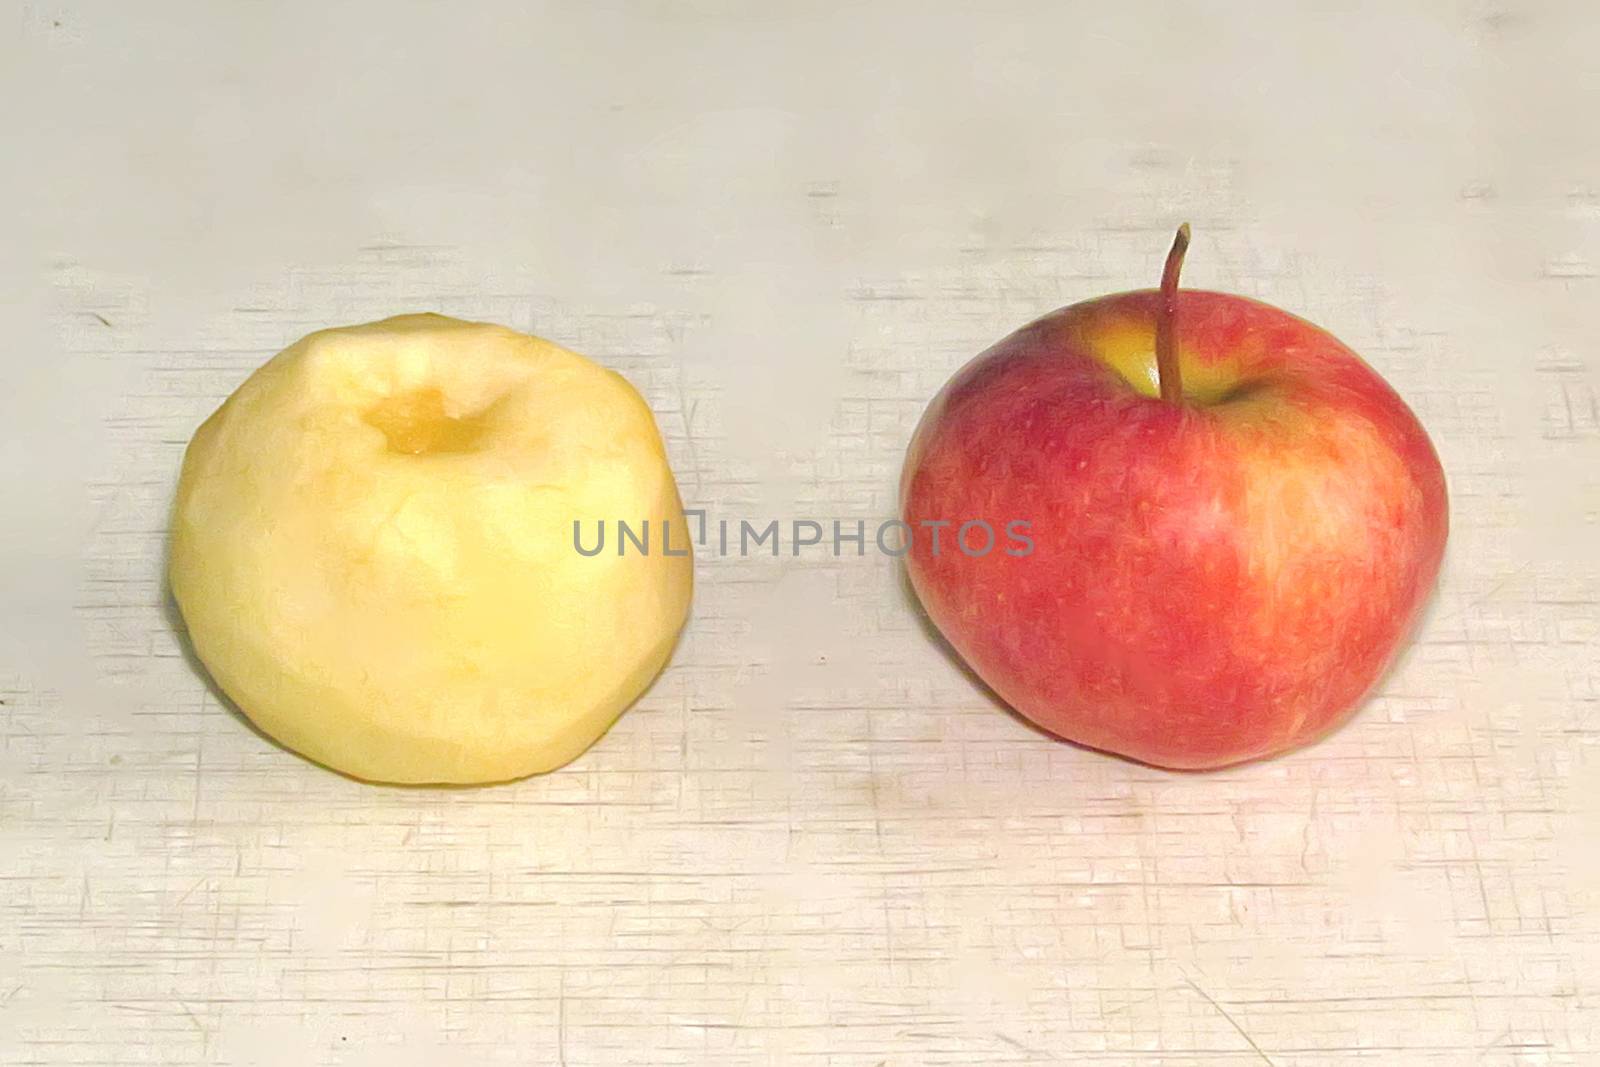            the apple without a peel  the apple with a peel on the table what is the use